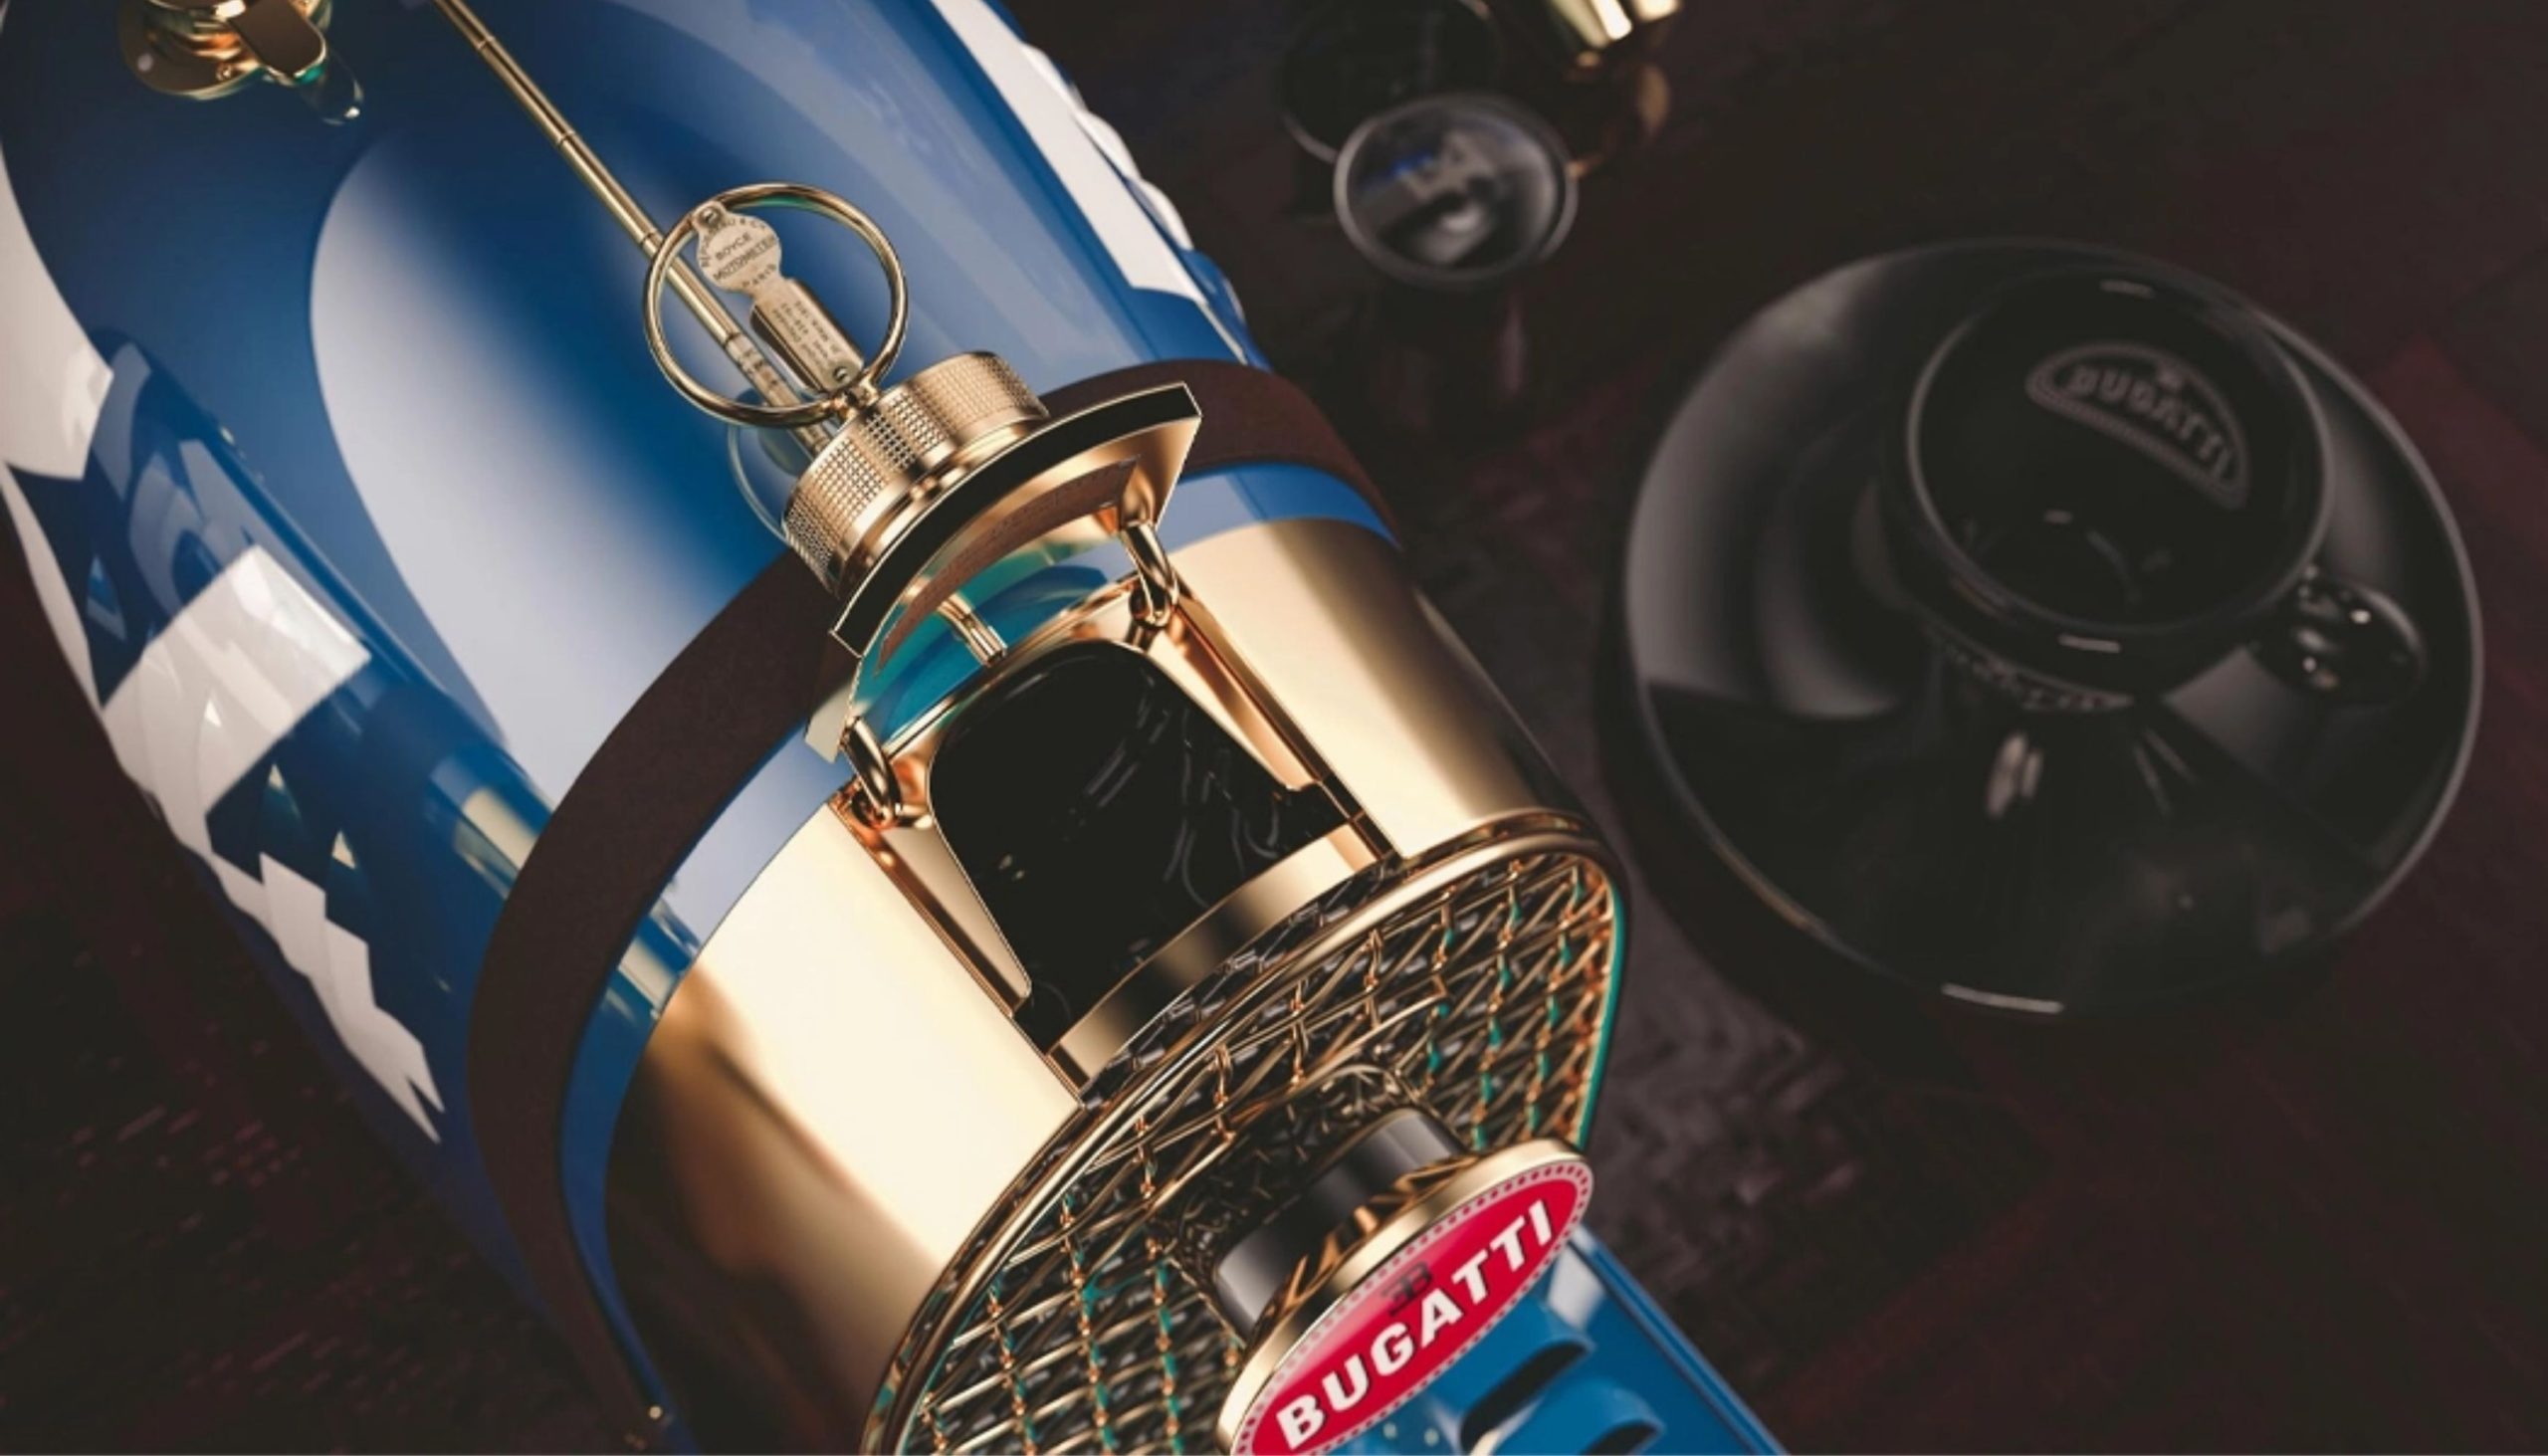 This Bugatti Type 35-inspired Coffee Machine will get you all revved up and happy